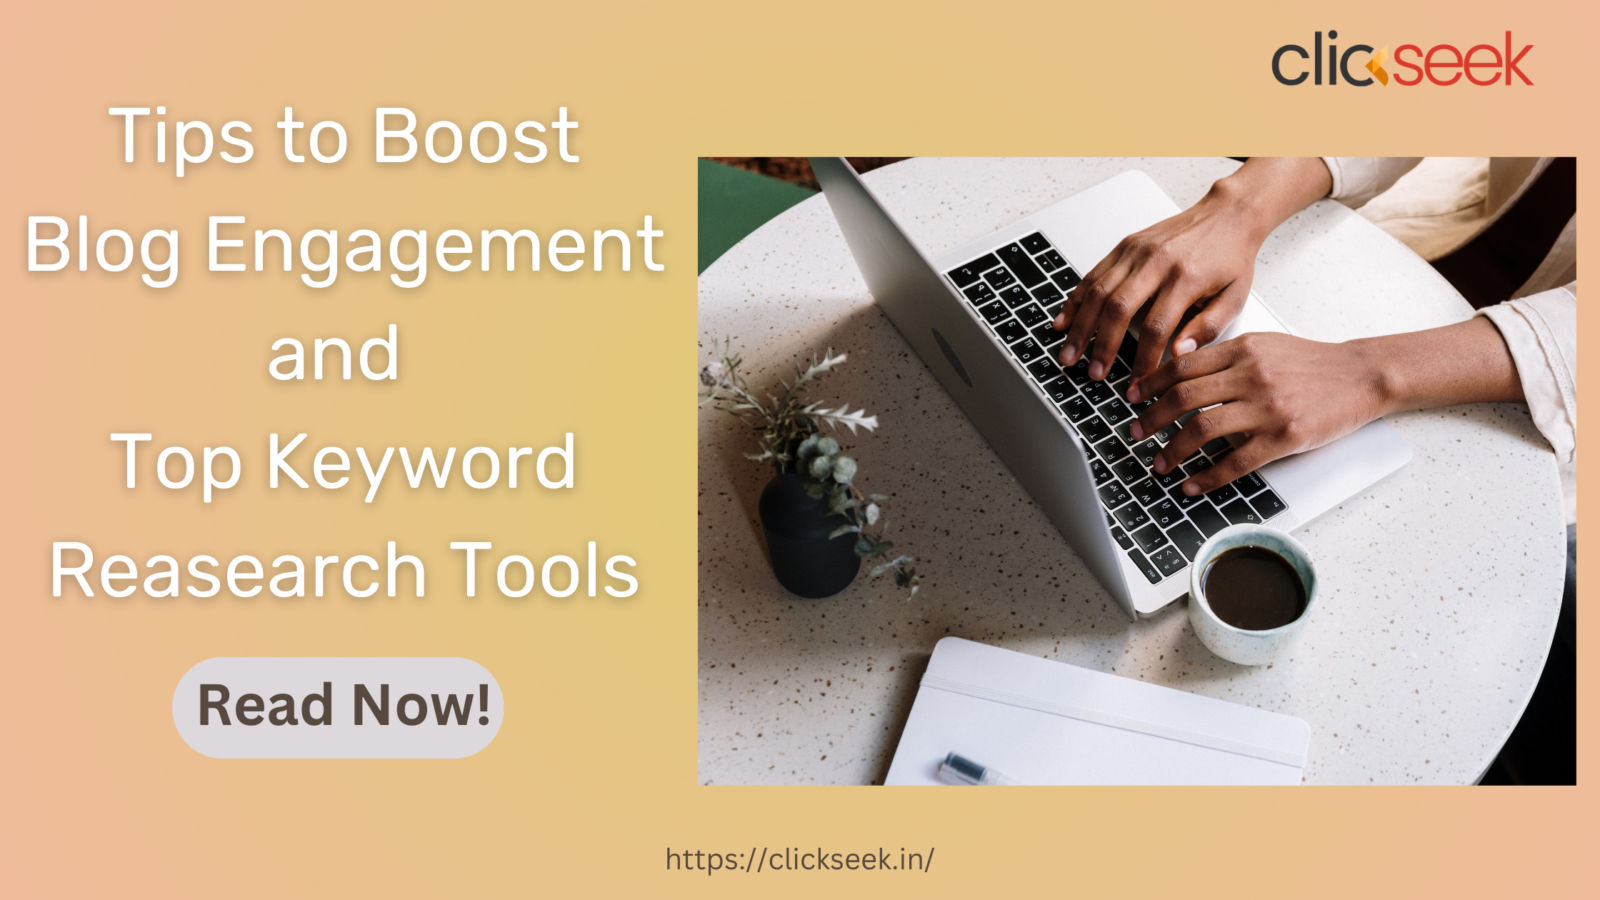 Tips to Boost Blog Engagement and Top Keyword Reasearch Tools